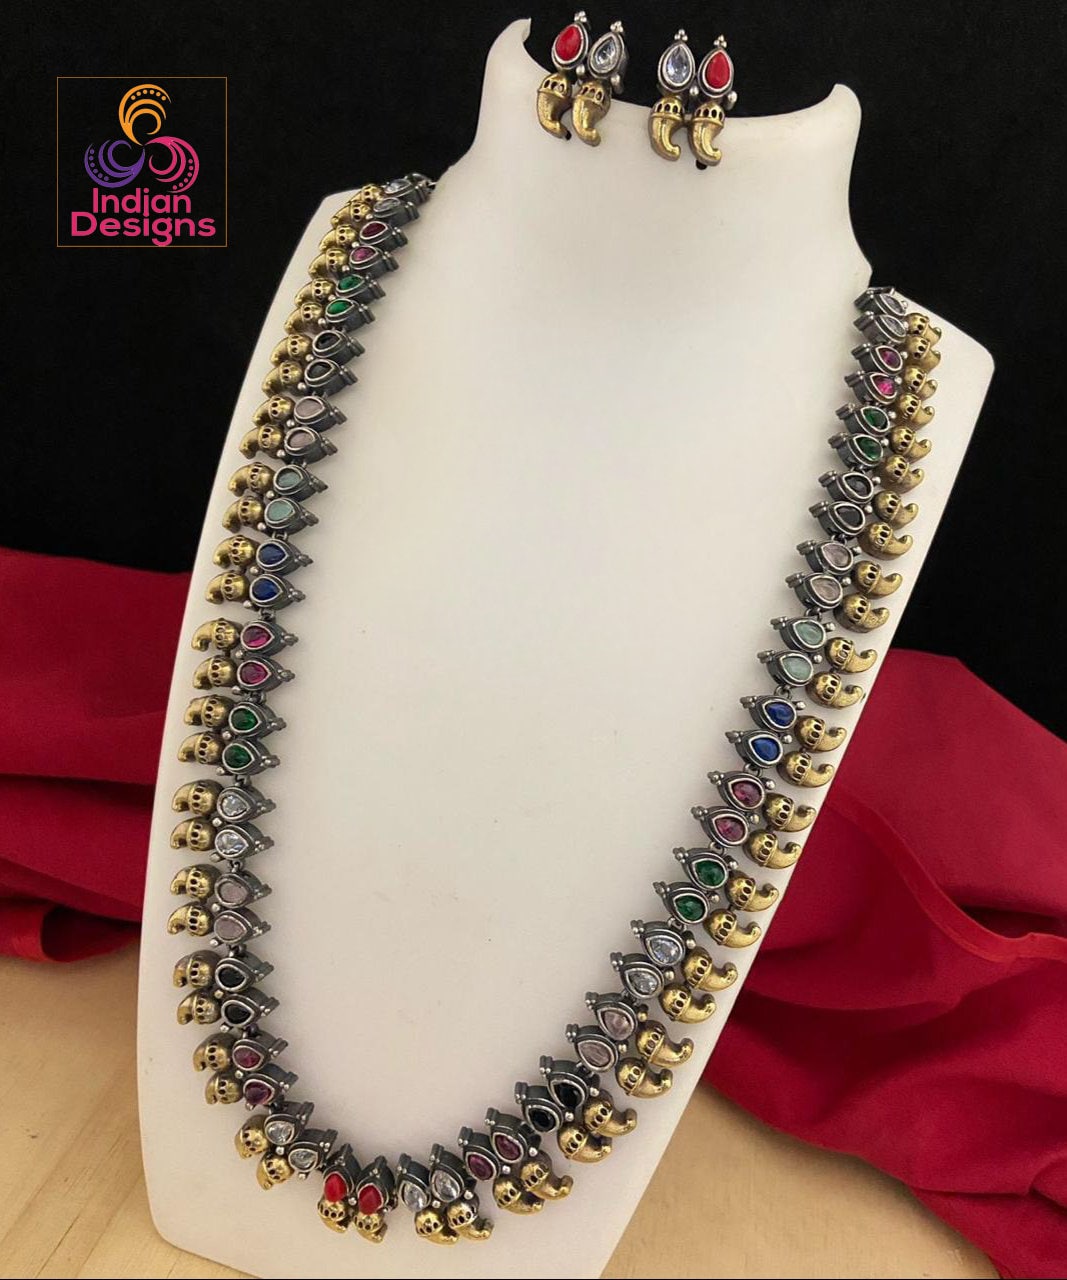 Oxidized Silver Two tone Long necklace, Multi color stone stone jewelry, Silver mango necklace, Indian Wedding Jewelry, German Silver necklace and Earrings, Long necklace for saree, Antique silver-Gold tone necklace, Indian Temple jewelry